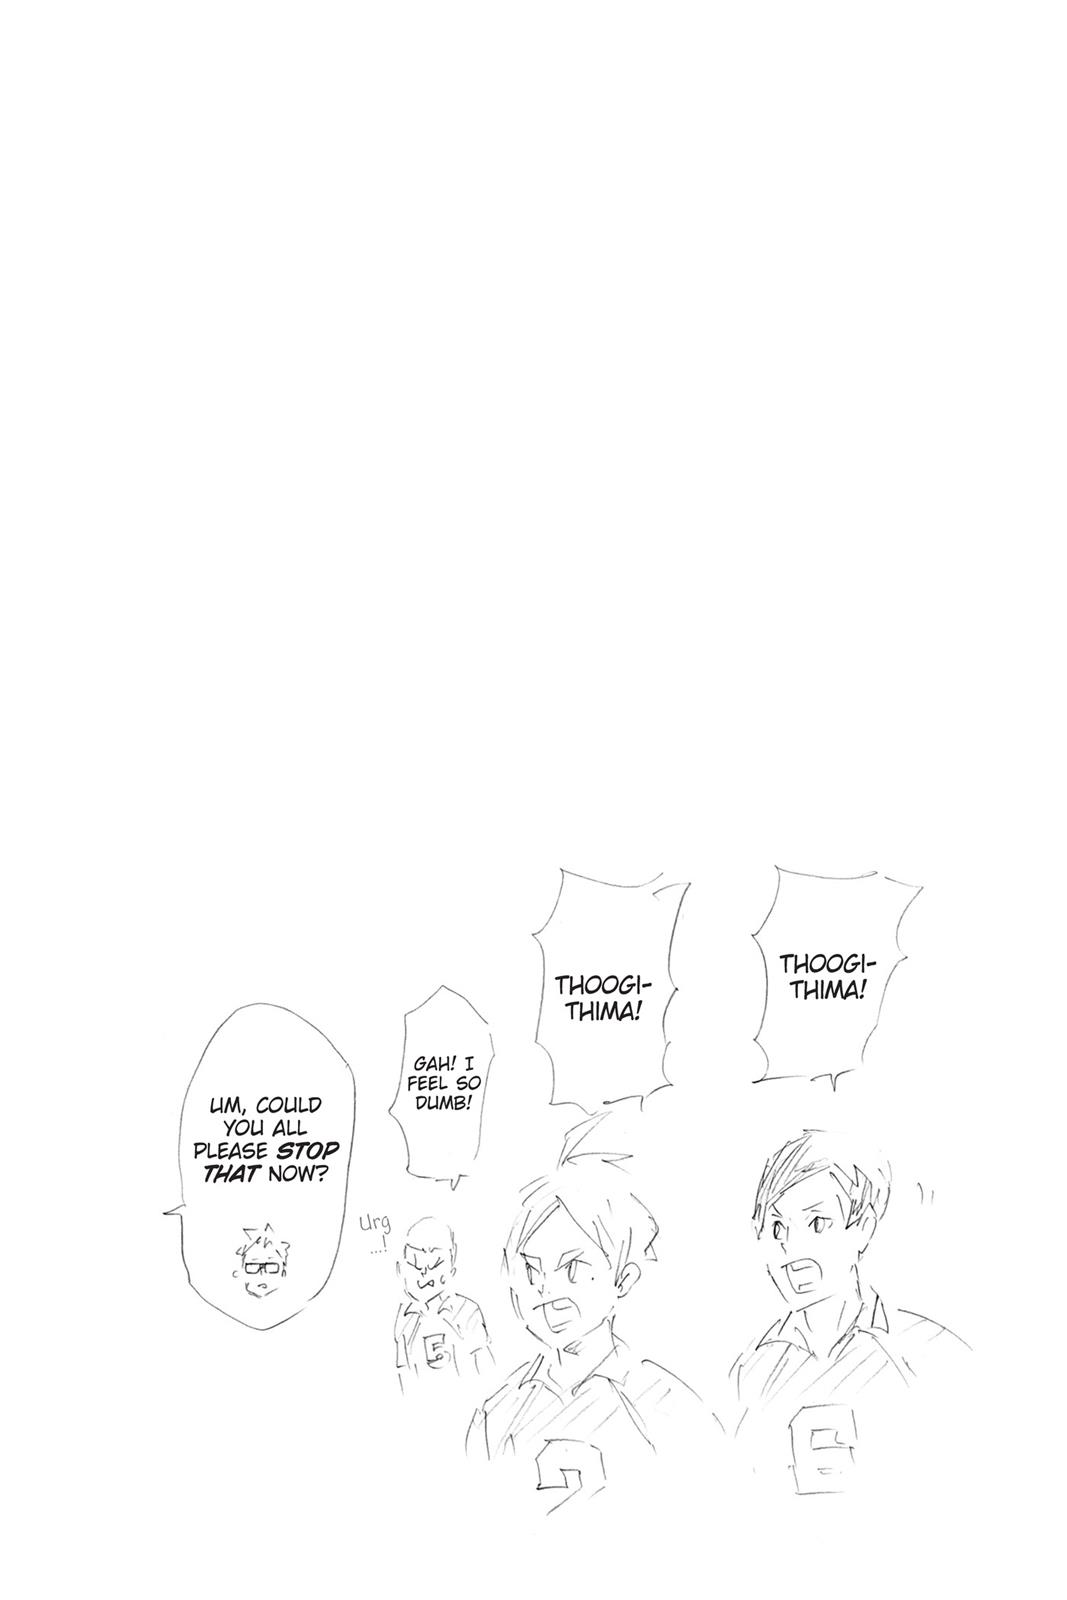  Chapter 130 image 018